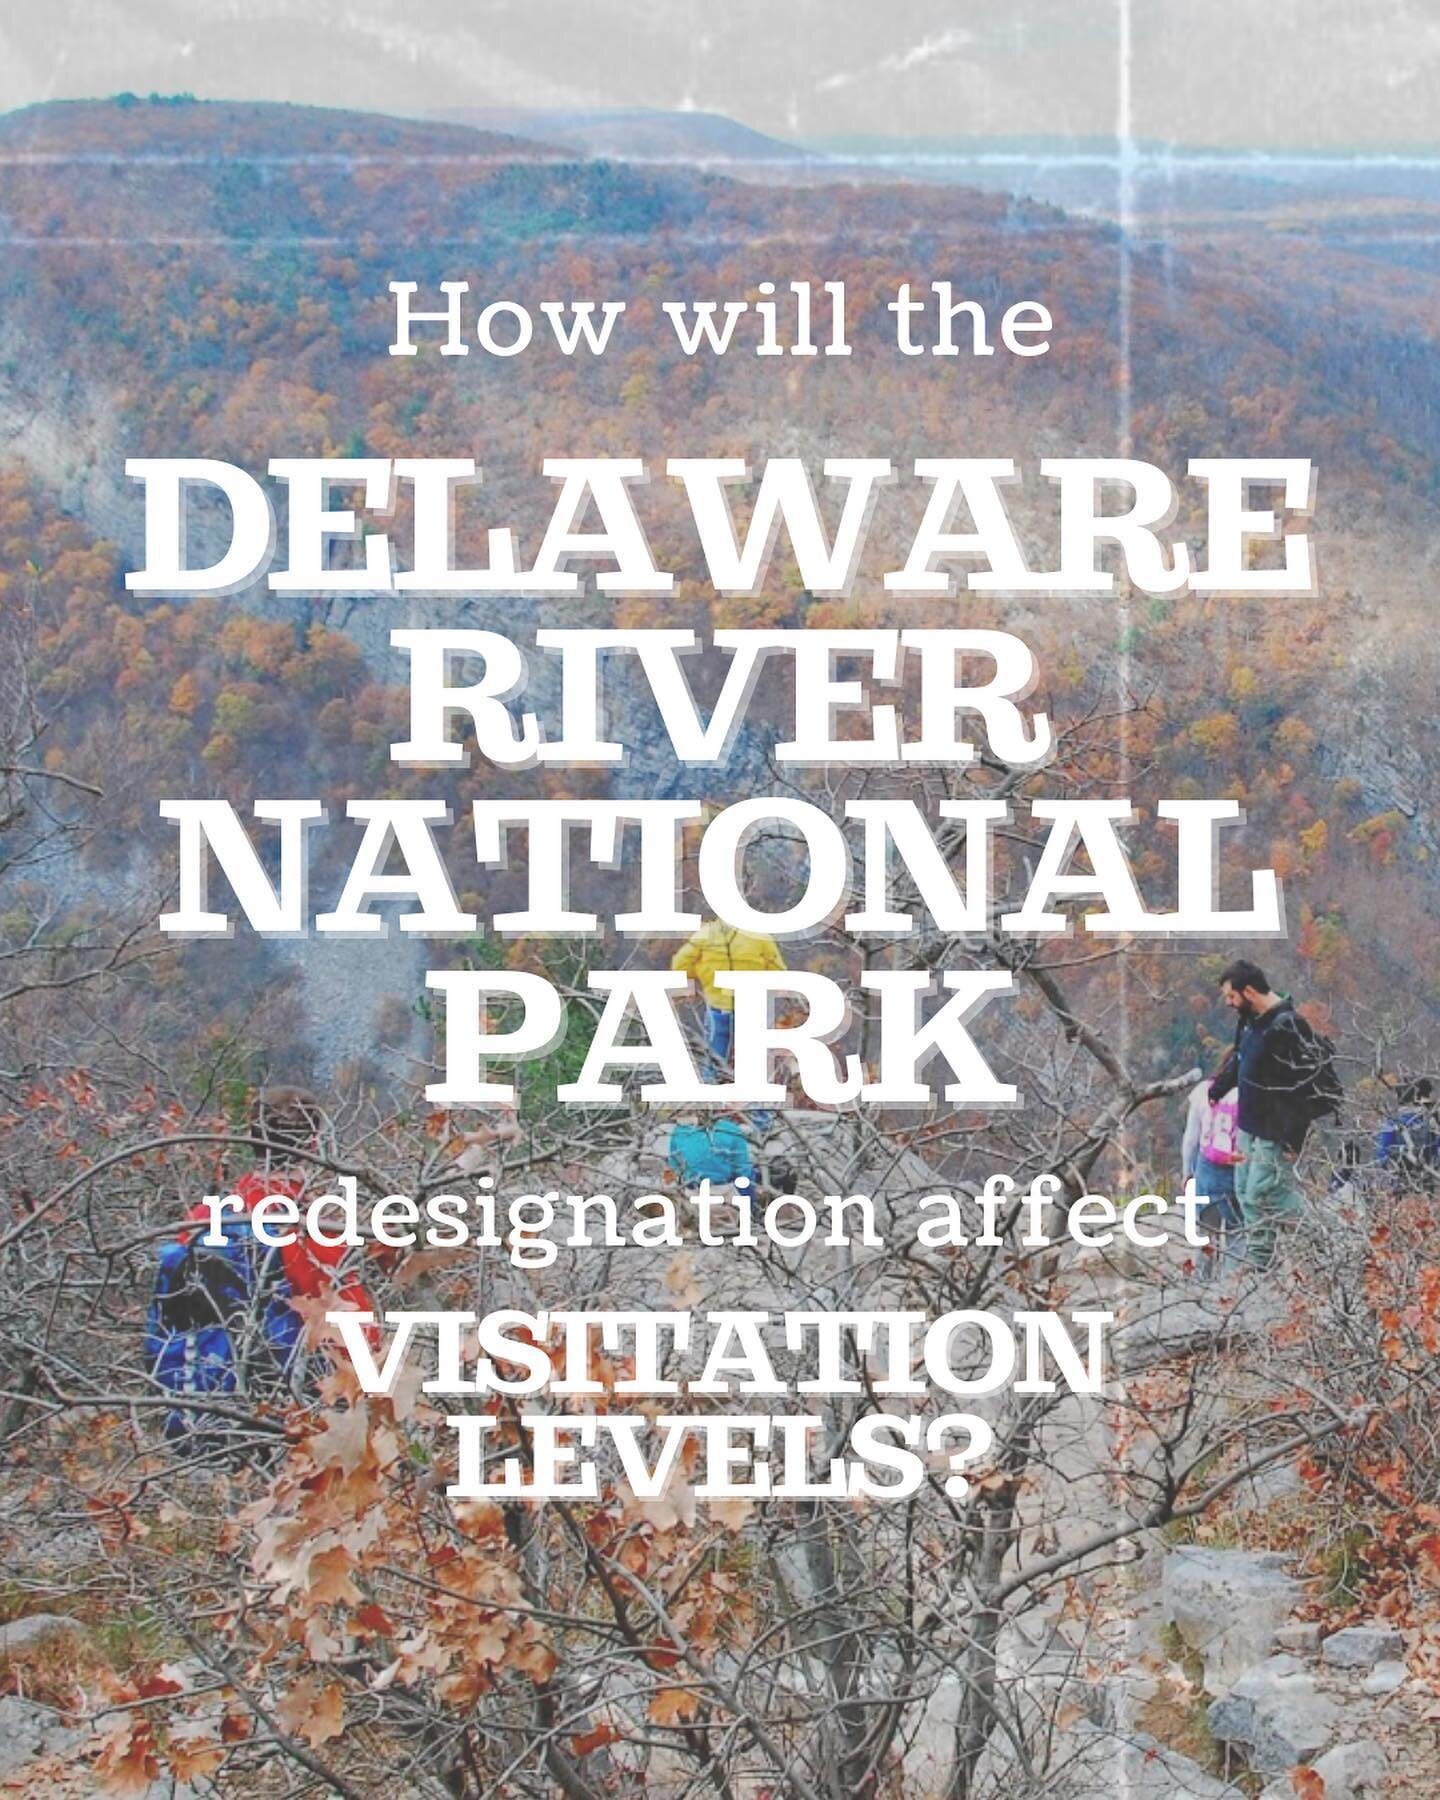 Todays post examines what the impact of visitation might be on the Delaware Water Gap Recreation Area if it is redesignated as a National park